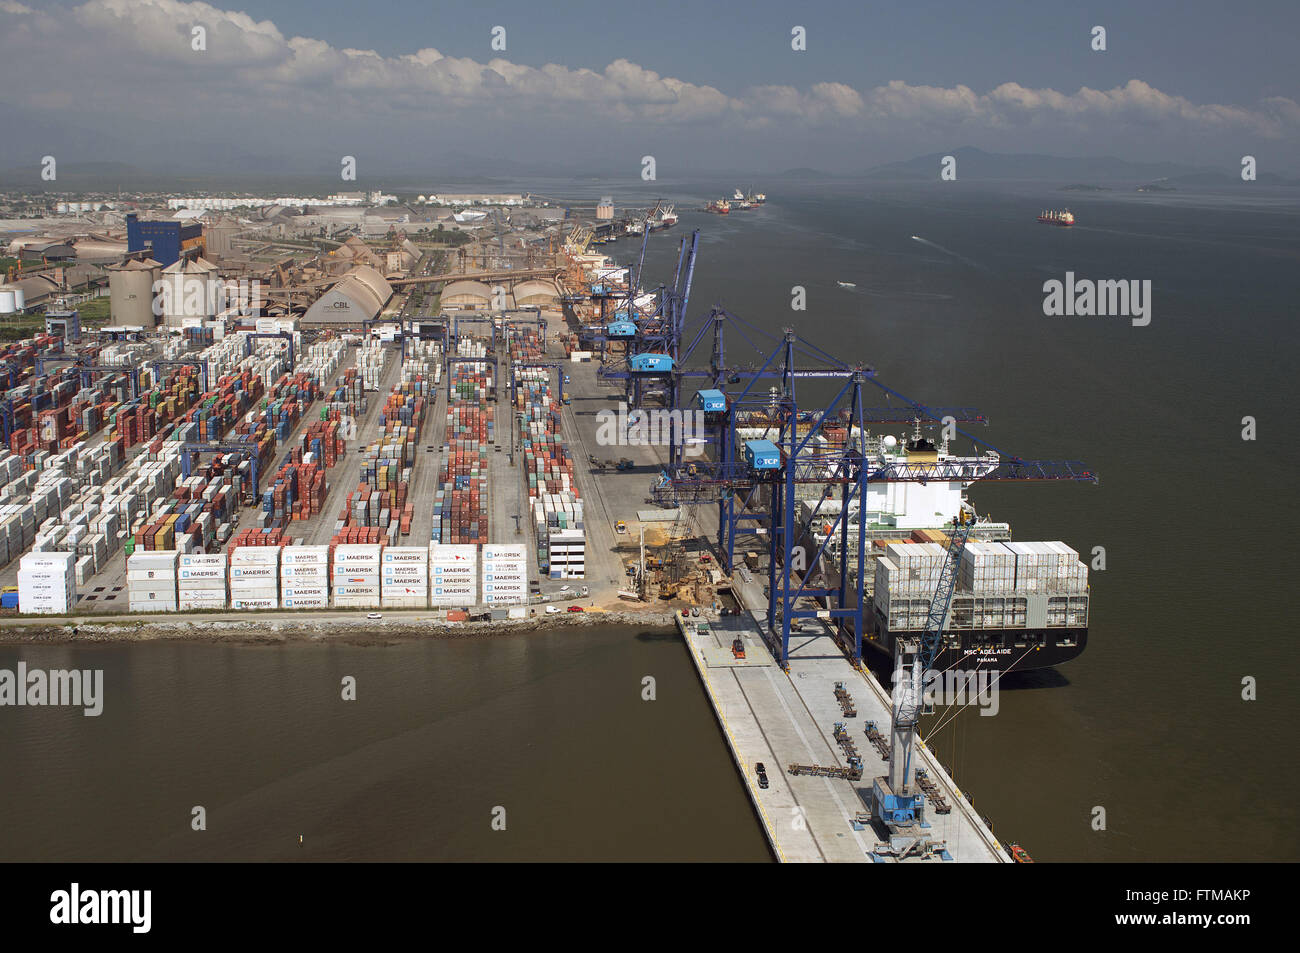 Aerial view of the container terminal of the port on the shore of the Bay of Paranagua Stock Photo